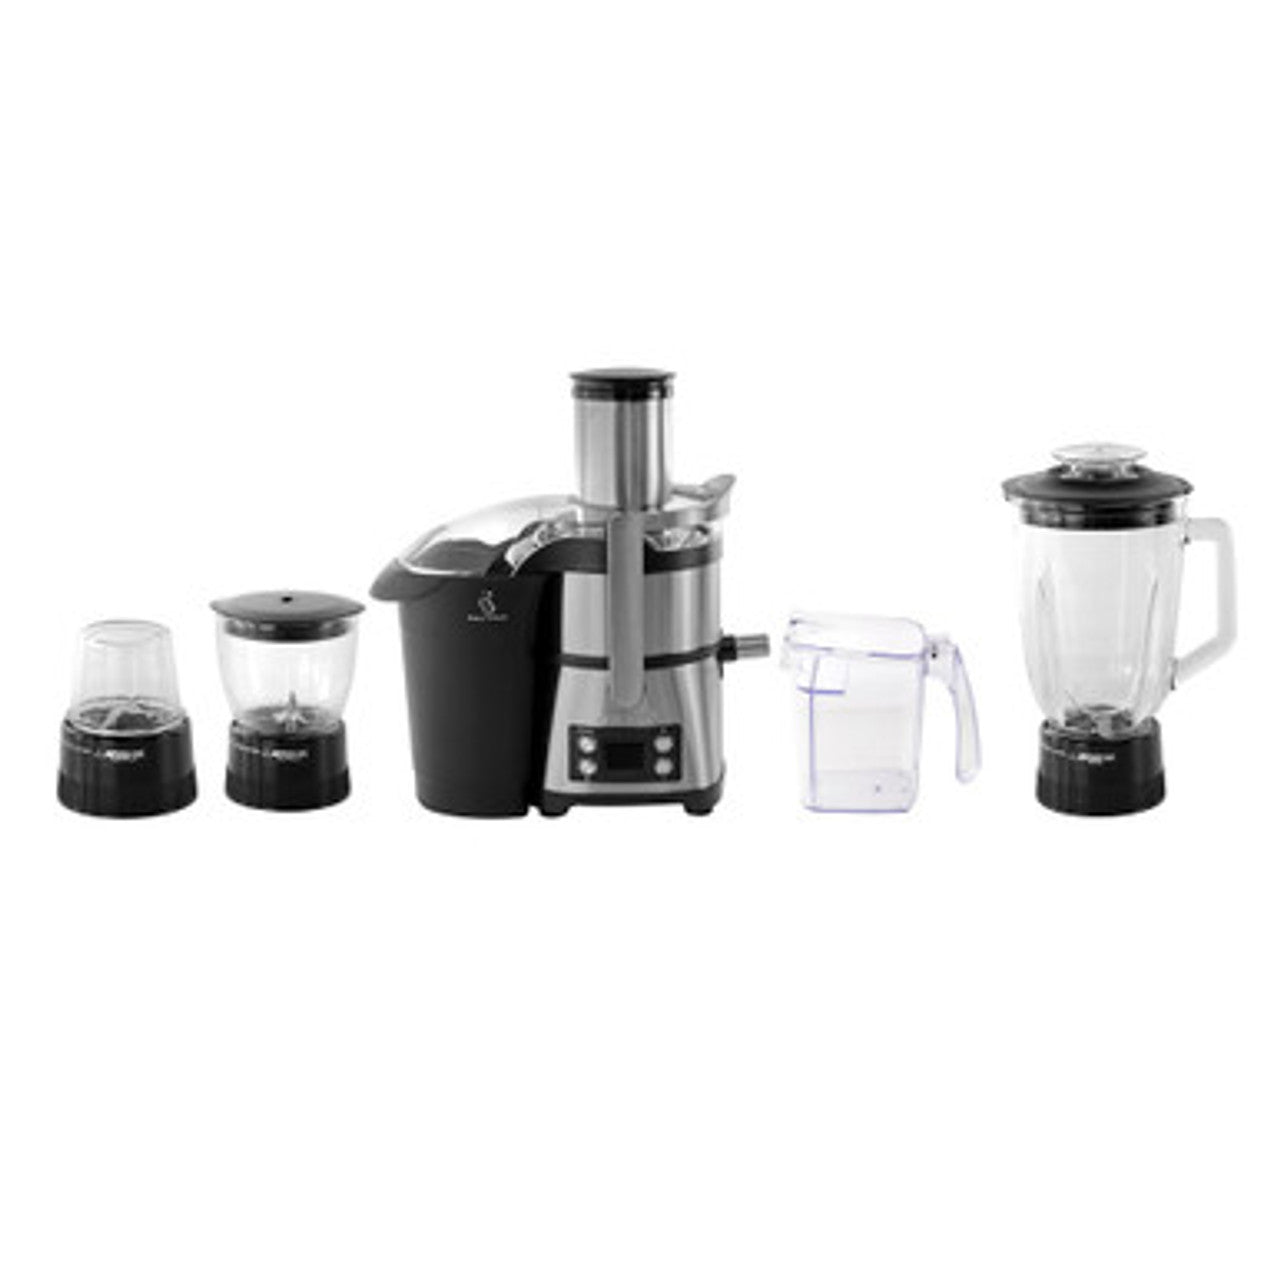 Arshia 4 in 1 Juicer Extractor